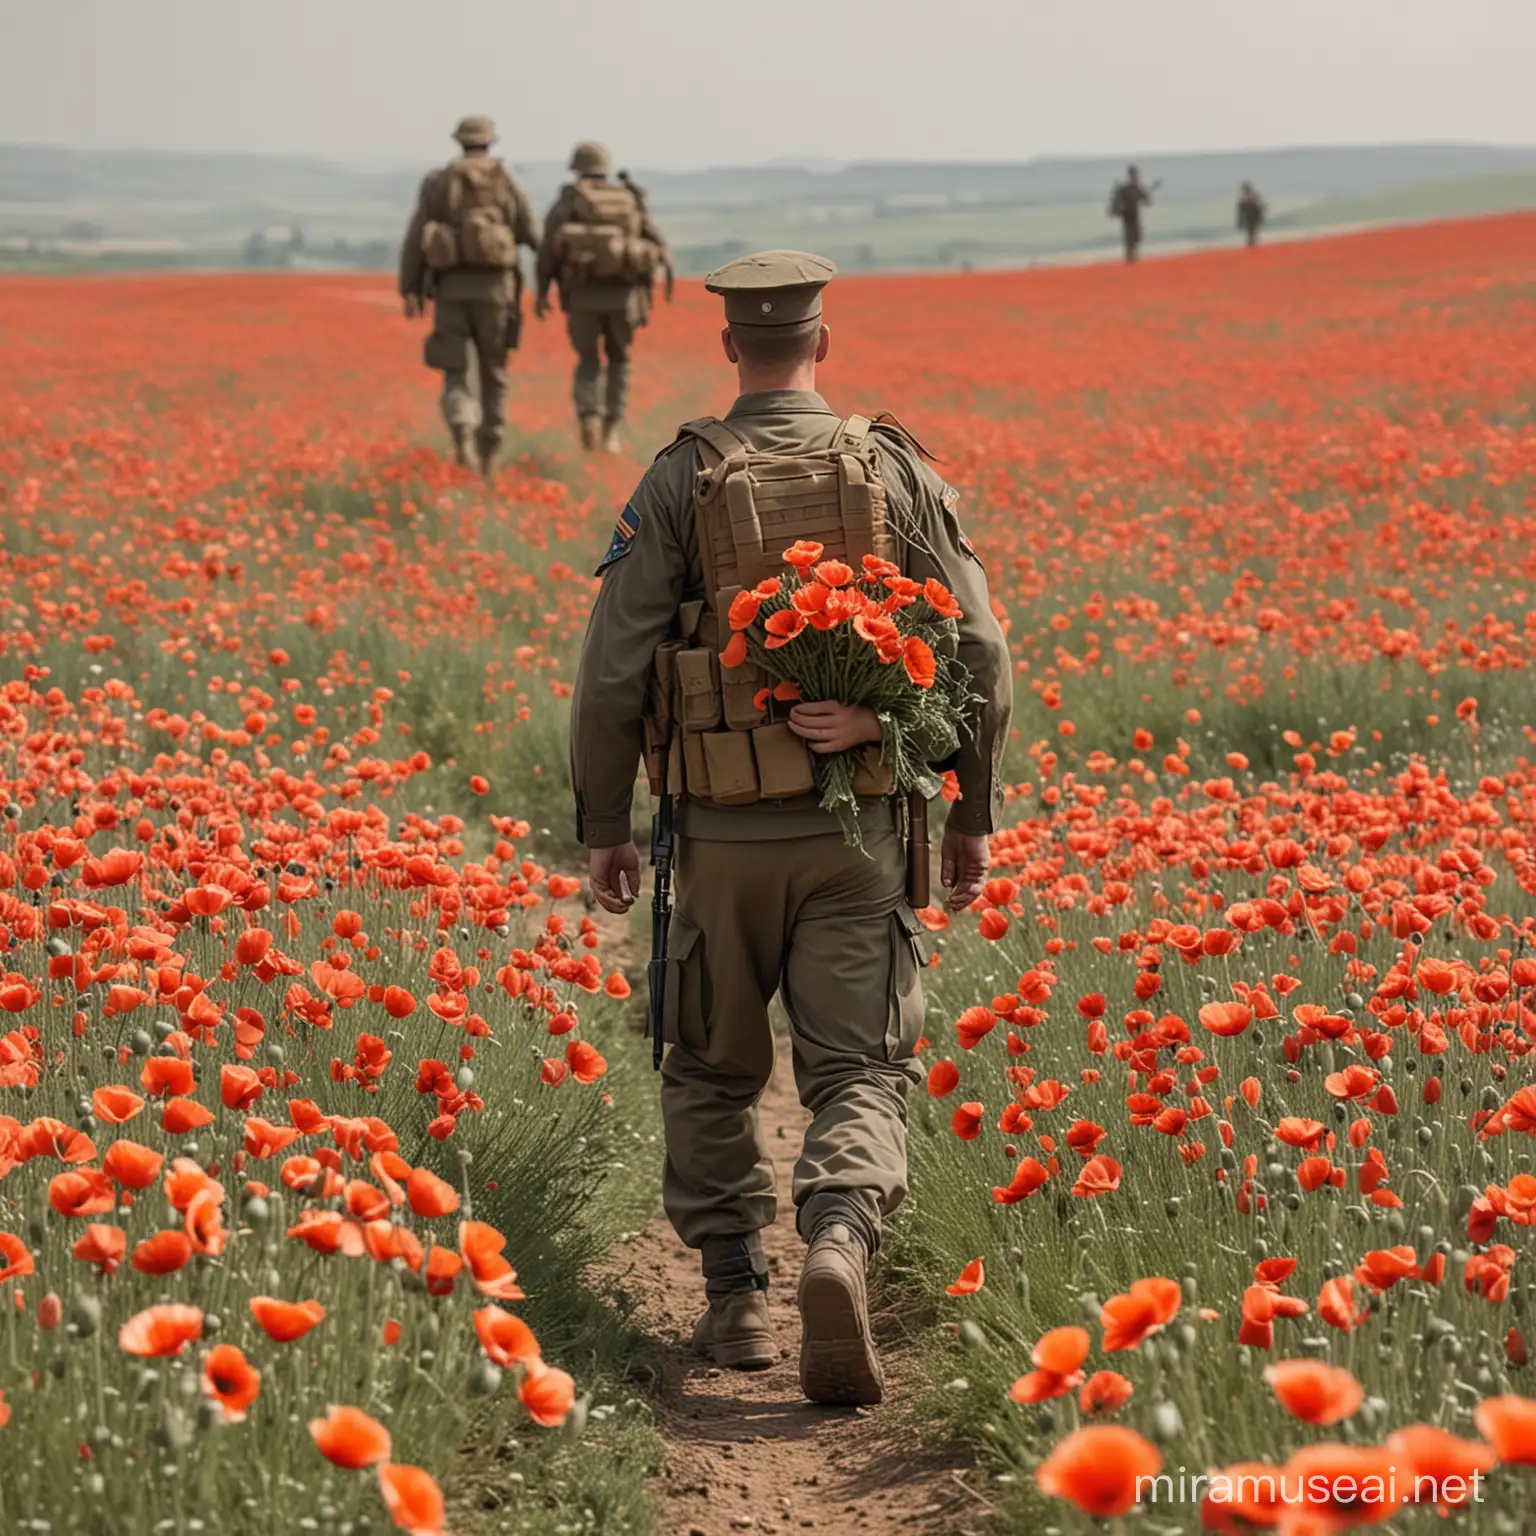 Soldier Carrying Injured Comrade Through Field of Poppies During War